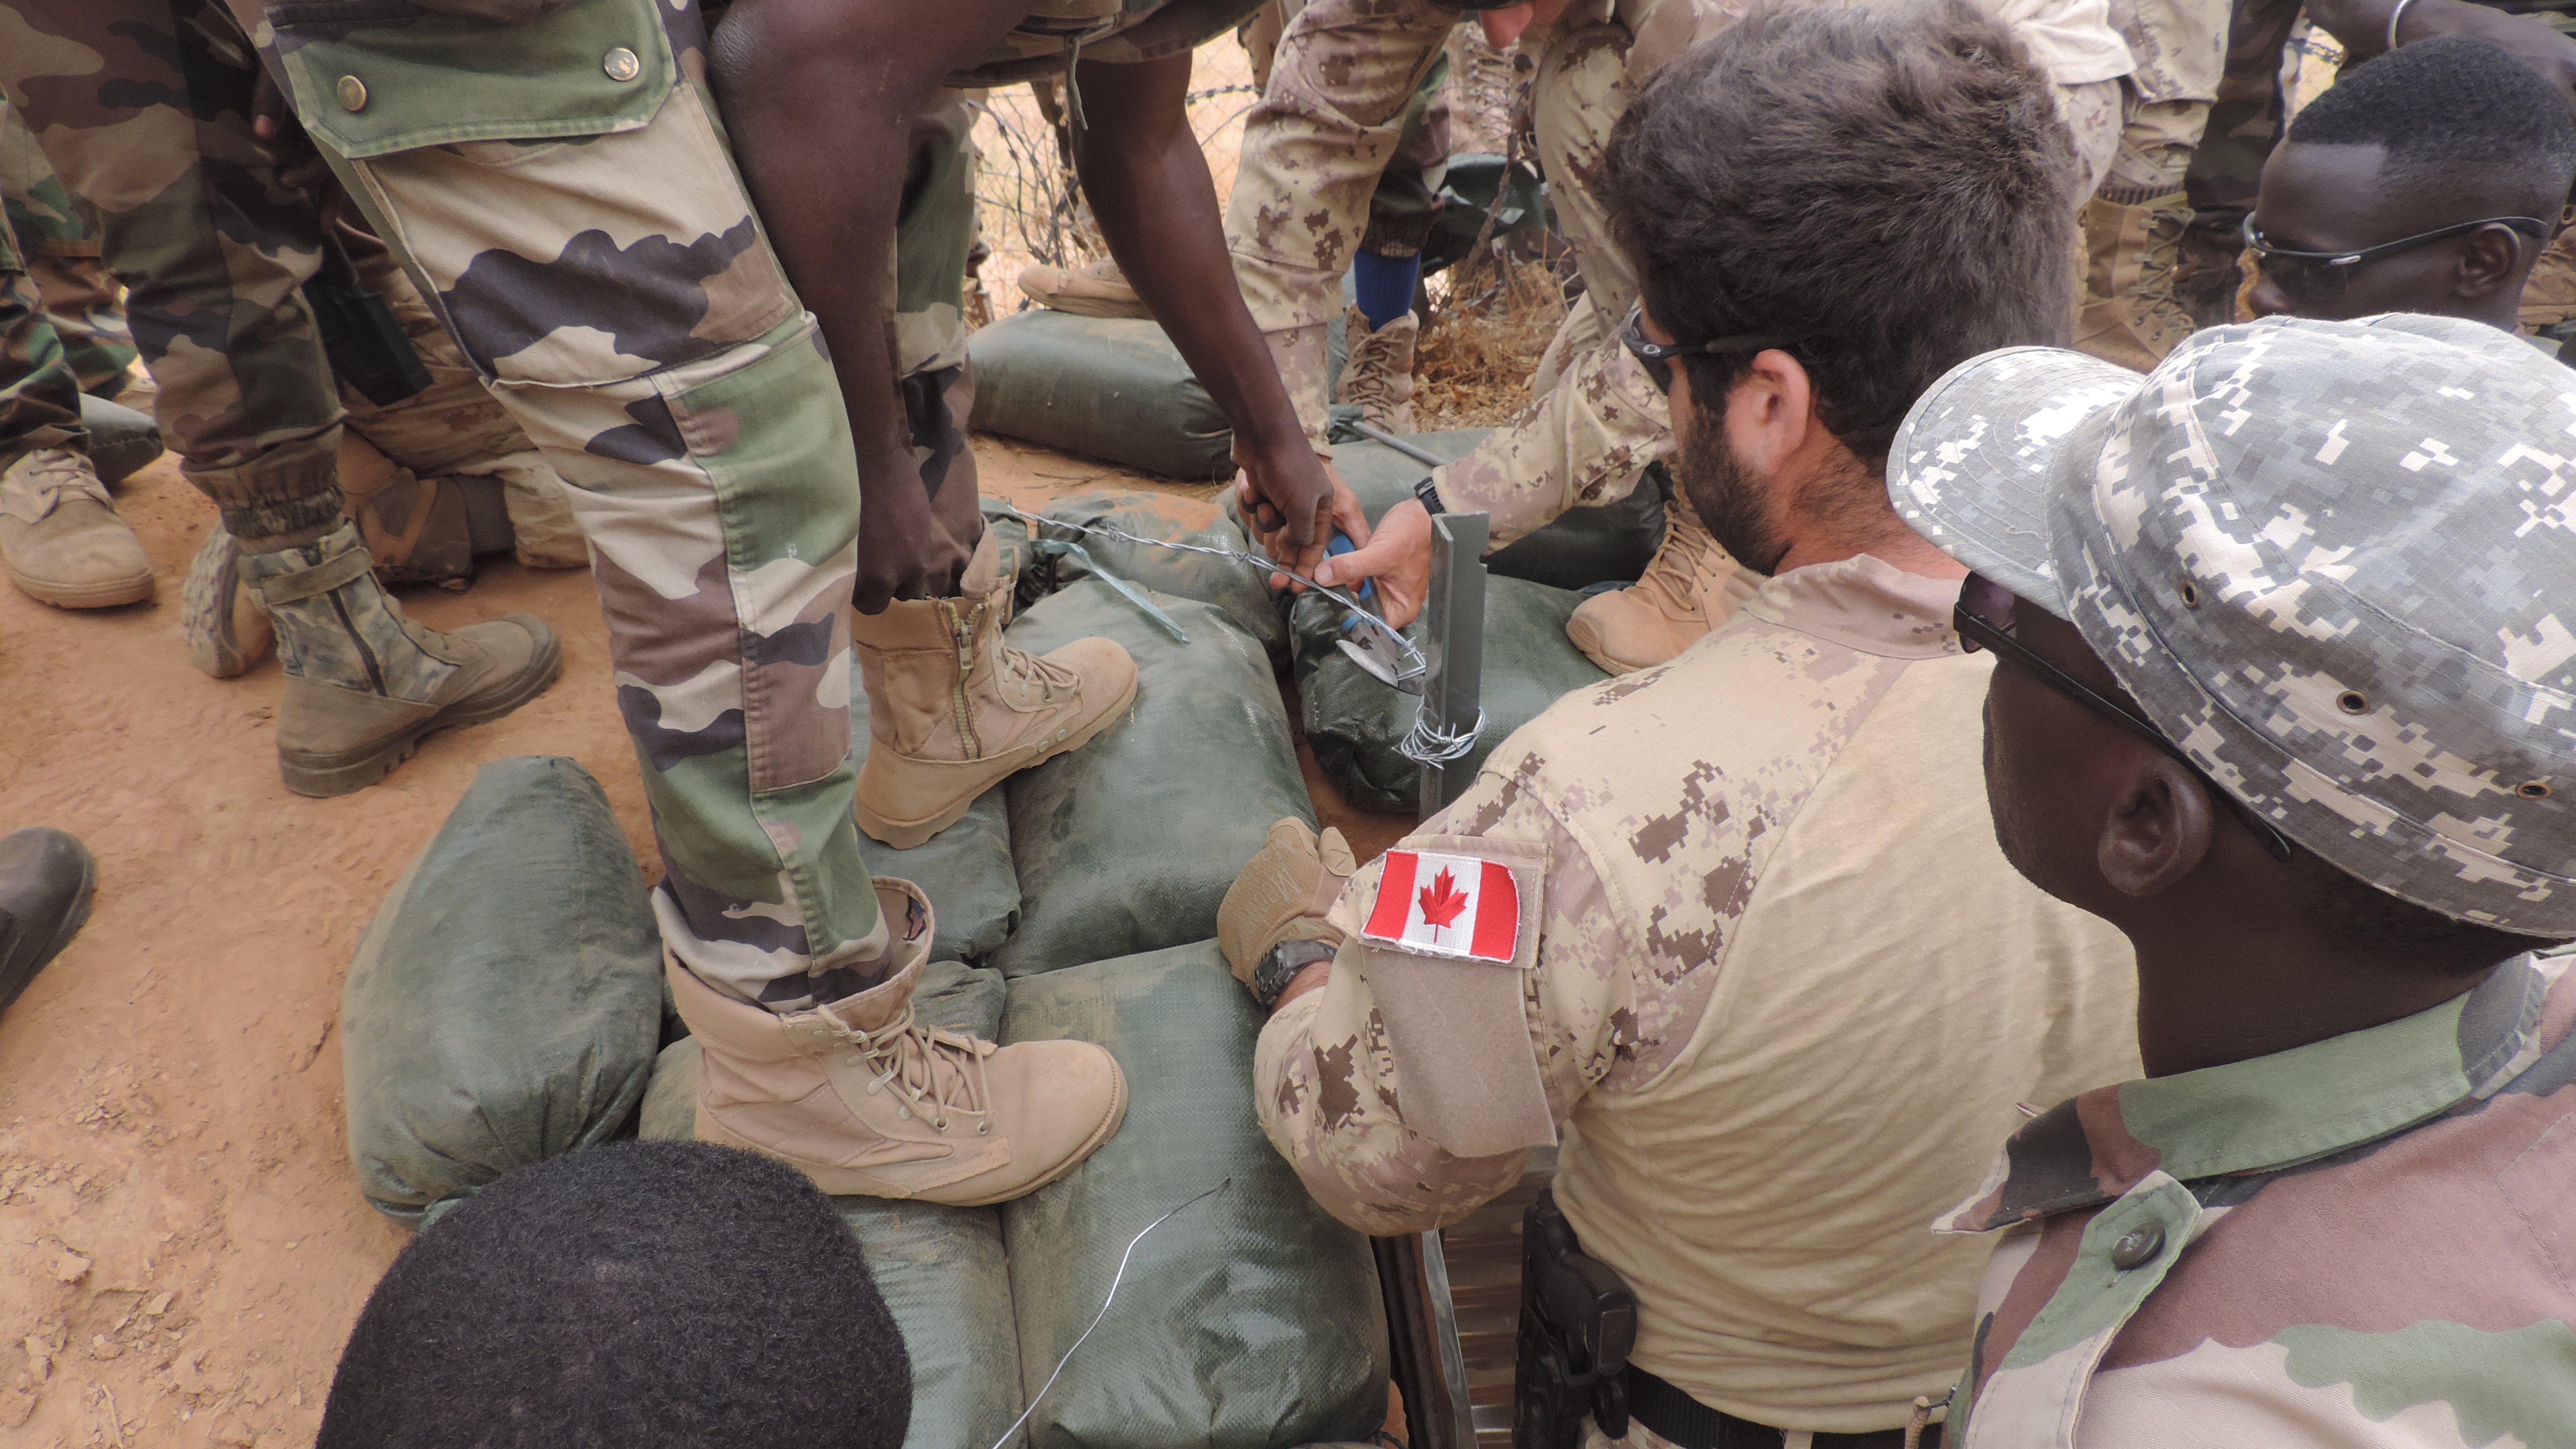 A Canadian Armed Forces members mentors members of the Forces armées nigériennes while they build trenches during Operation NABERIUS 2017 in Nigeria. (Photo: Op NABERIUS 1702)